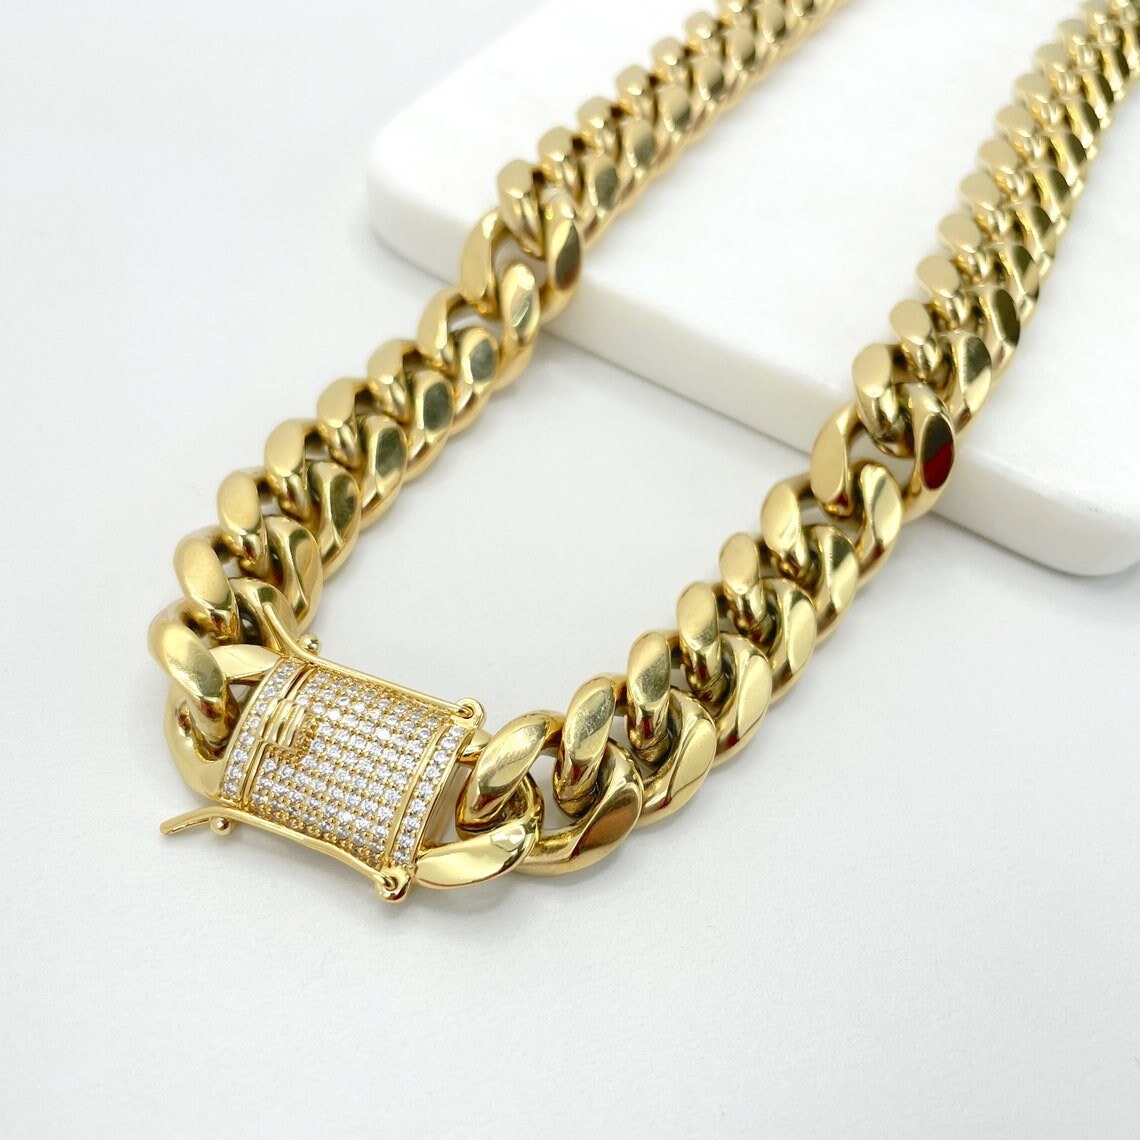 14k Gold Filled Miami Cuban Link 10mm or 14mm Bracelet  Double Safety Lock Box Clasp In Micro Pave Cubic Zirconia Wholesale Jewelry Supplies